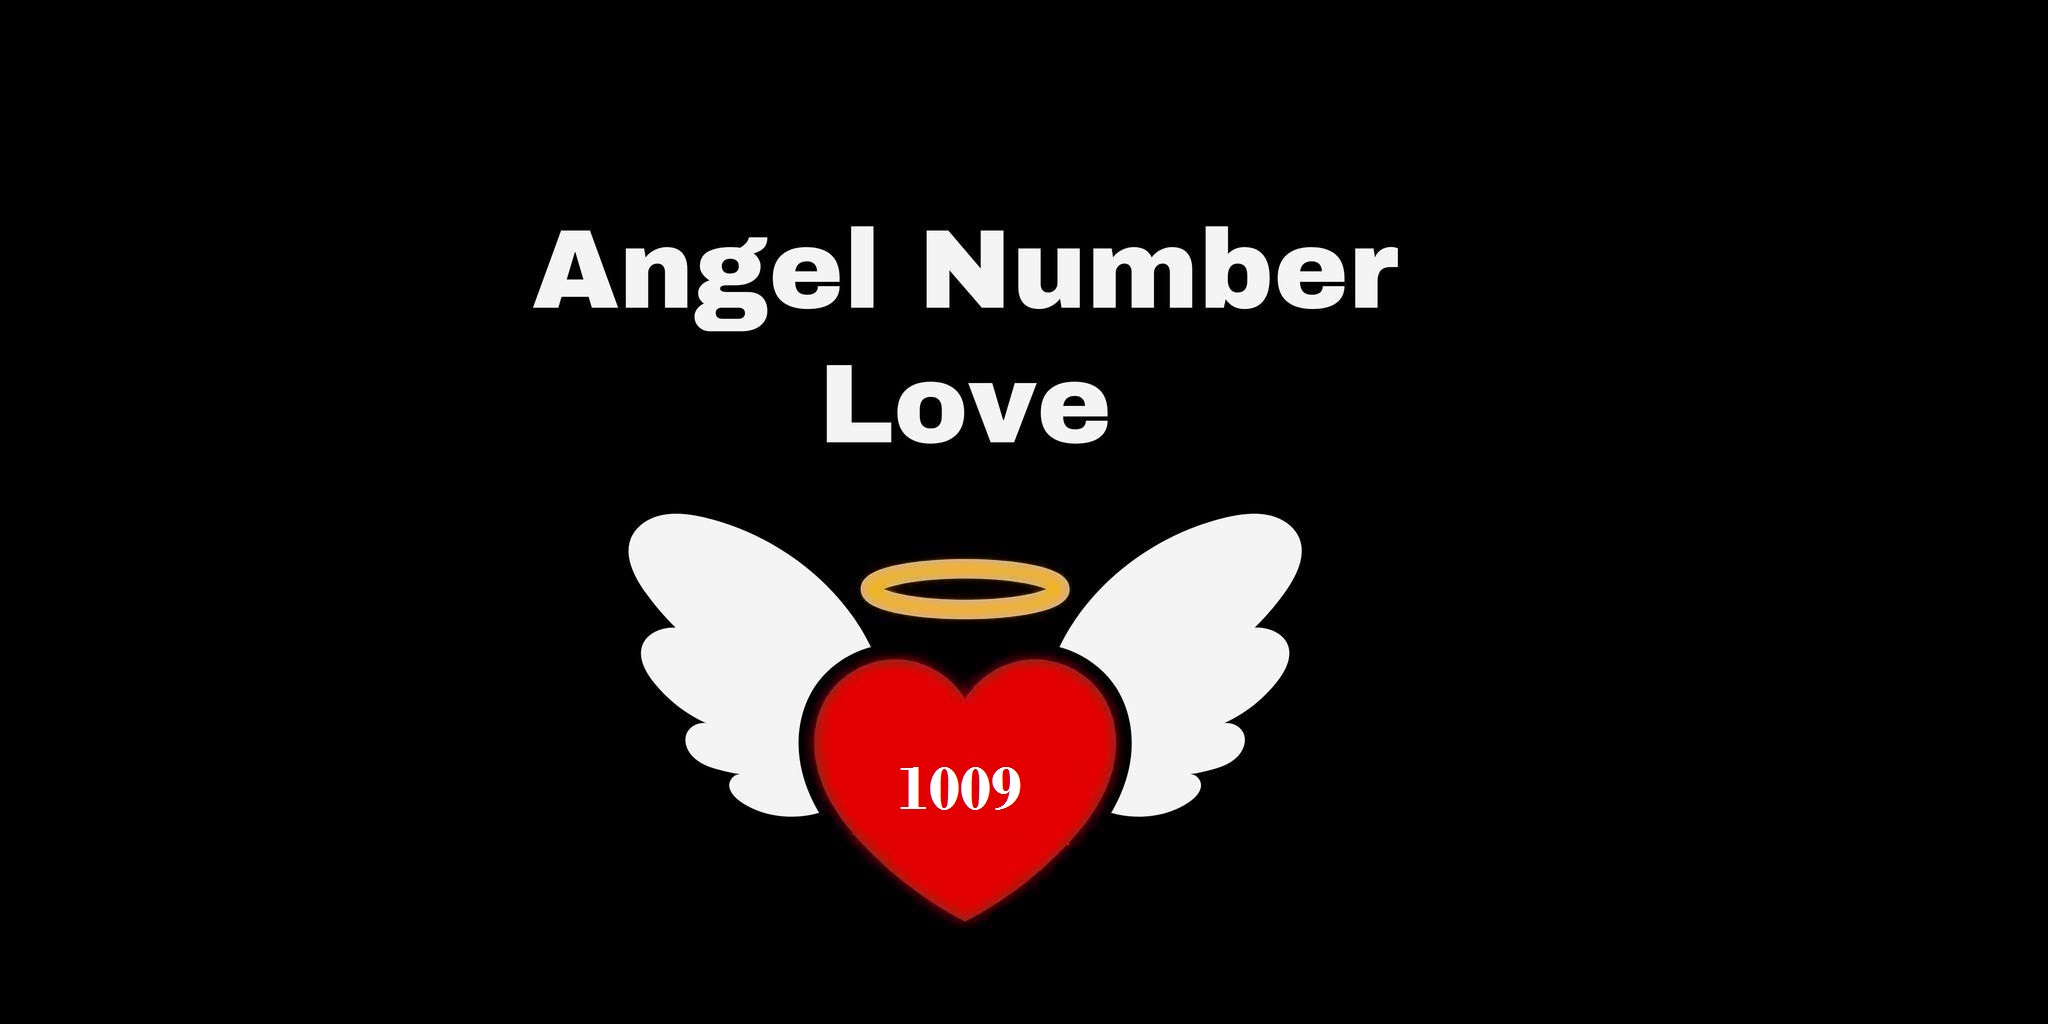 1009 Angel Number Meaning In Love